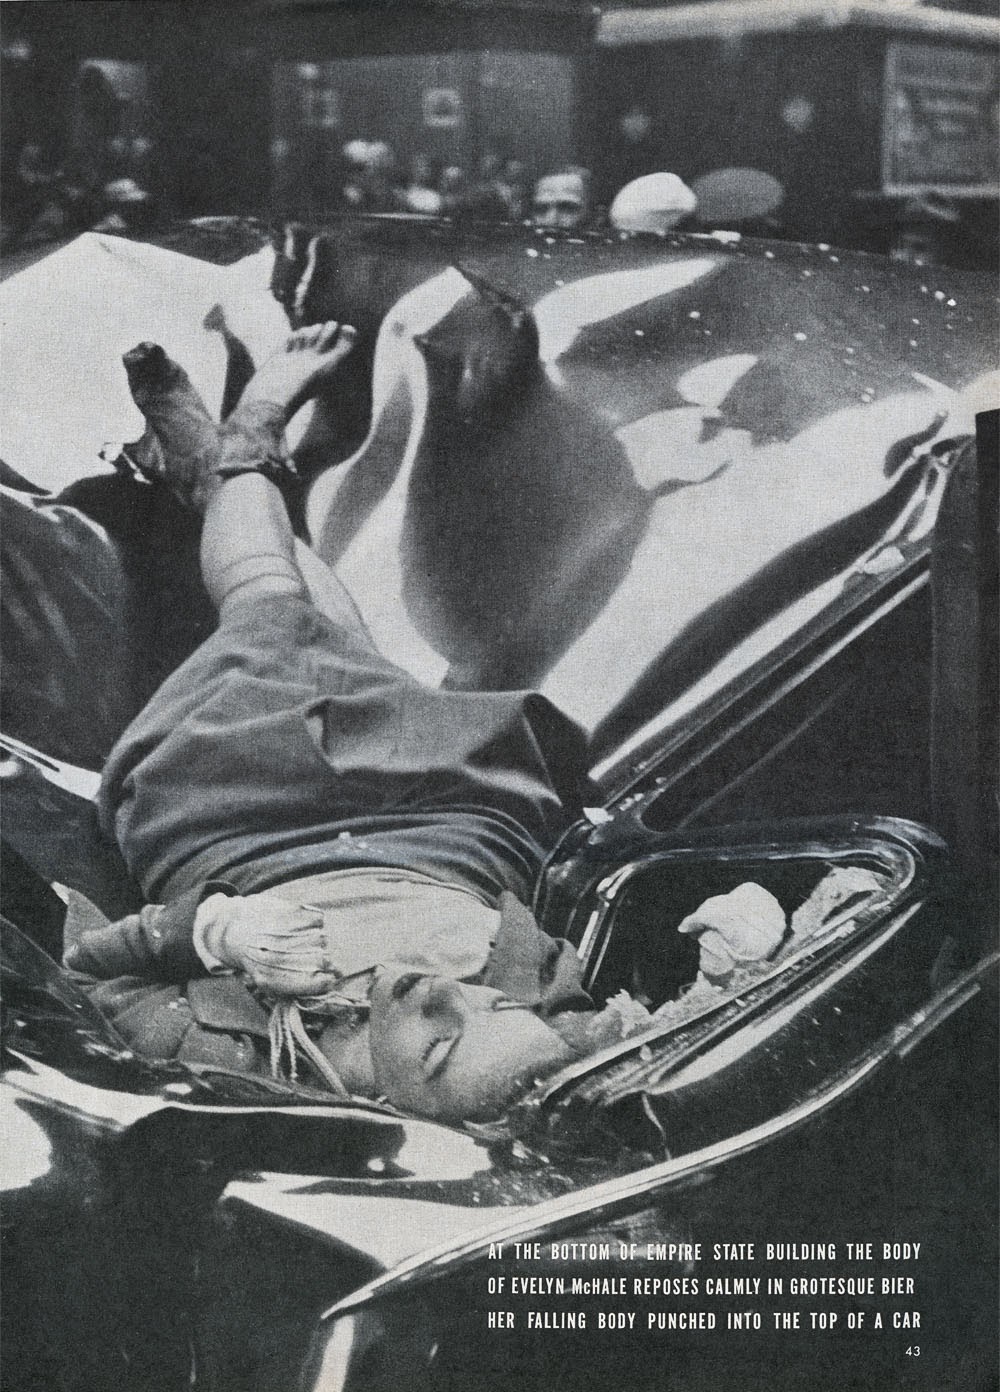 "The most beautiful suicide" - Evelyn McHale, 1947.